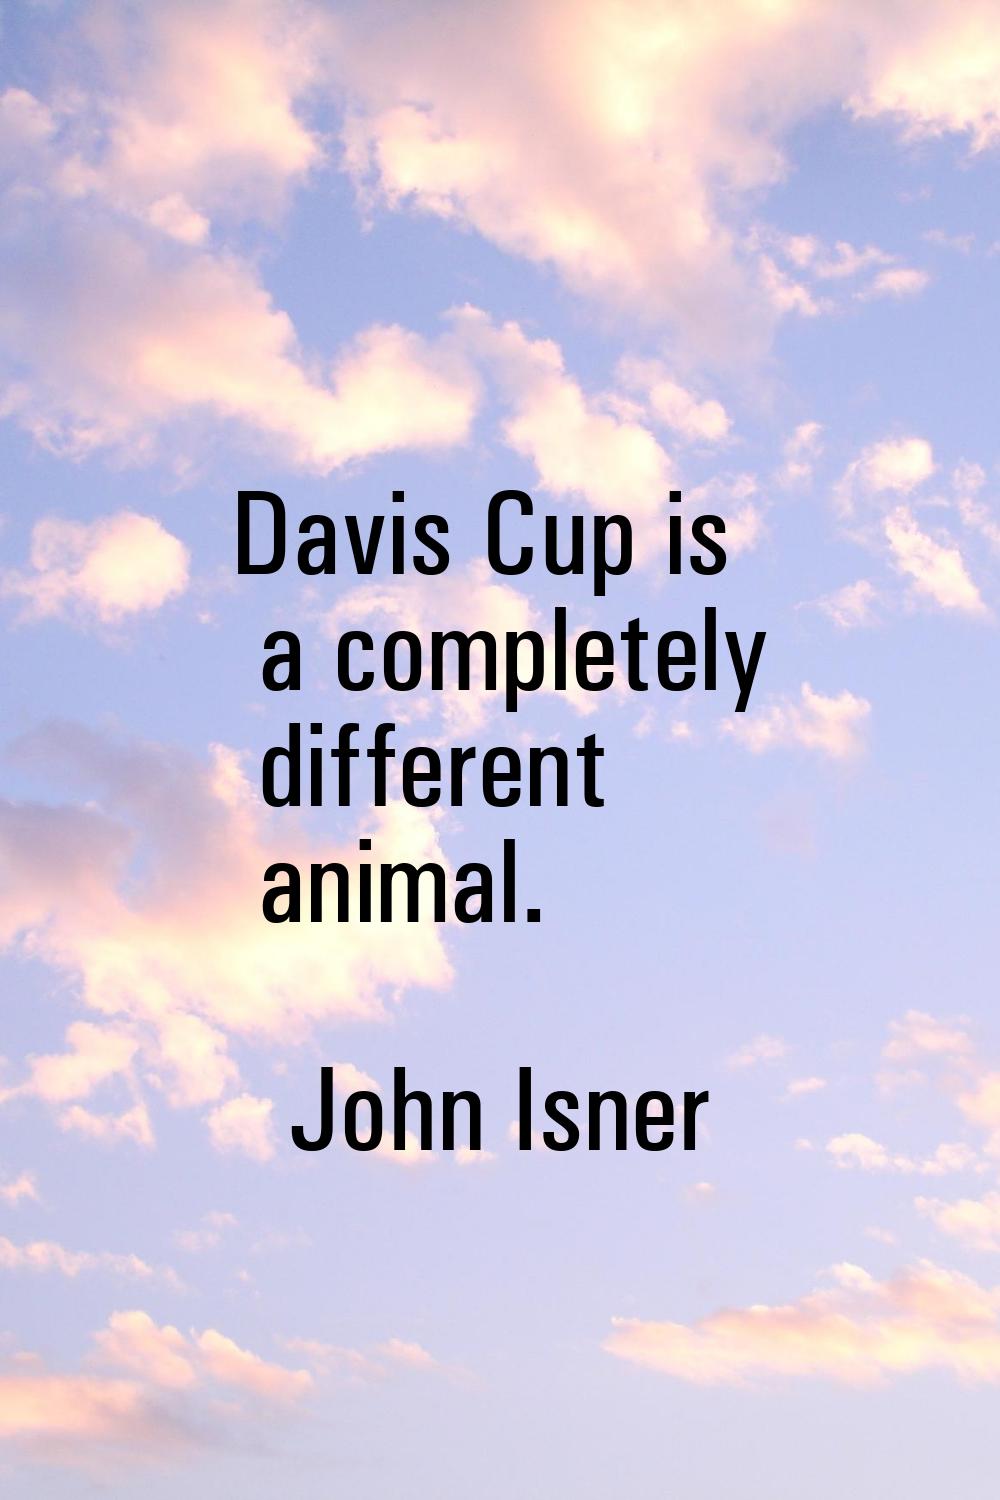 Davis Cup is a completely different animal.